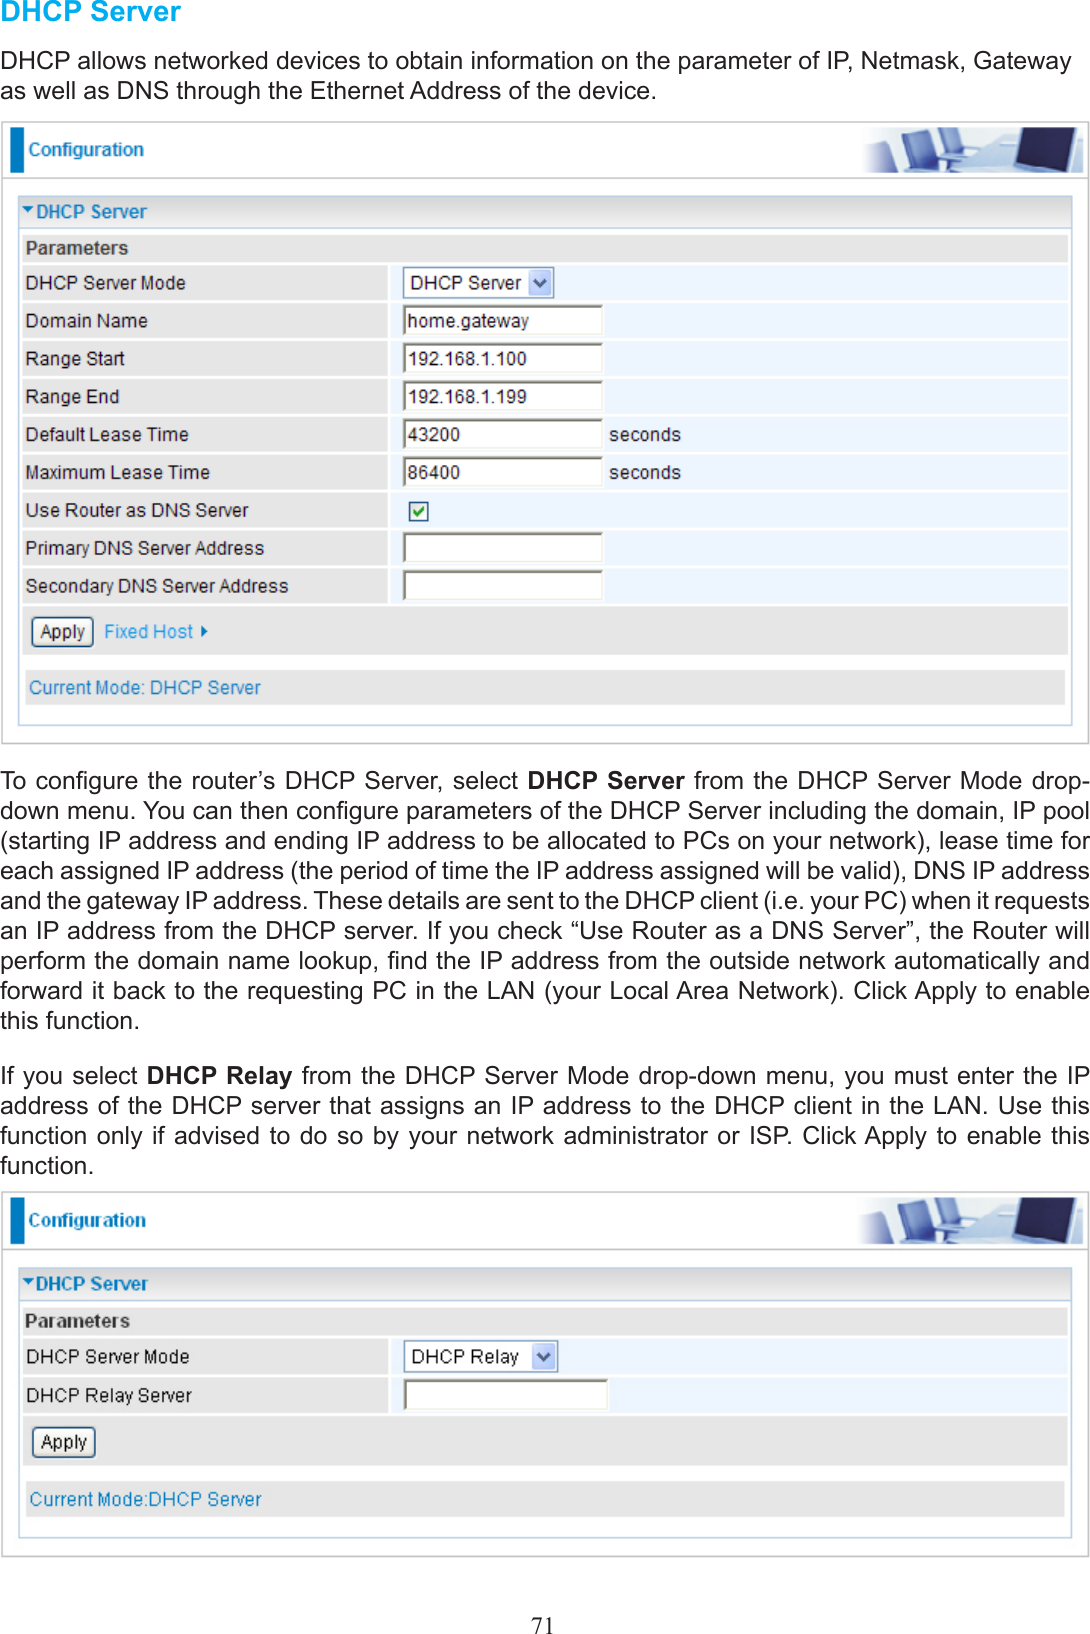 71DHCP ServerDHCP allows networked devices to obtain information on the parameter of IP, Netmask, Gateway as well as DNS through the Ethernet Address of the device.To congure the router’s DHCP Server, select DHCP Server from the DHCP Server Mode drop-down menu. You can then congure parameters of the DHCP Server including the domain, IP pool (starting IP address and ending IP address to be allocated to PCs on your network), lease time for each assigned IP address (the period of time the IP address assigned will be valid), DNS IP address and the gateway IP address. These details are sent to the DHCP client (i.e. your PC) when it requests an IP address from the DHCP server. If you check “Use Router as a DNS Server”, the Router will perform the domain name lookup, nd the IP address from the outside network automatically and forward it back to the requesting PC in the LAN (your Local Area Network). Click Apply to enable this function.If you select DHCP Relay from the DHCP Server Mode drop-down menu, you must enter the IP address of the DHCP server that assigns an IP address to the DHCP client in the LAN. Use this function only if advised to do so by your network administrator or ISP. Click Apply to enable this function. 